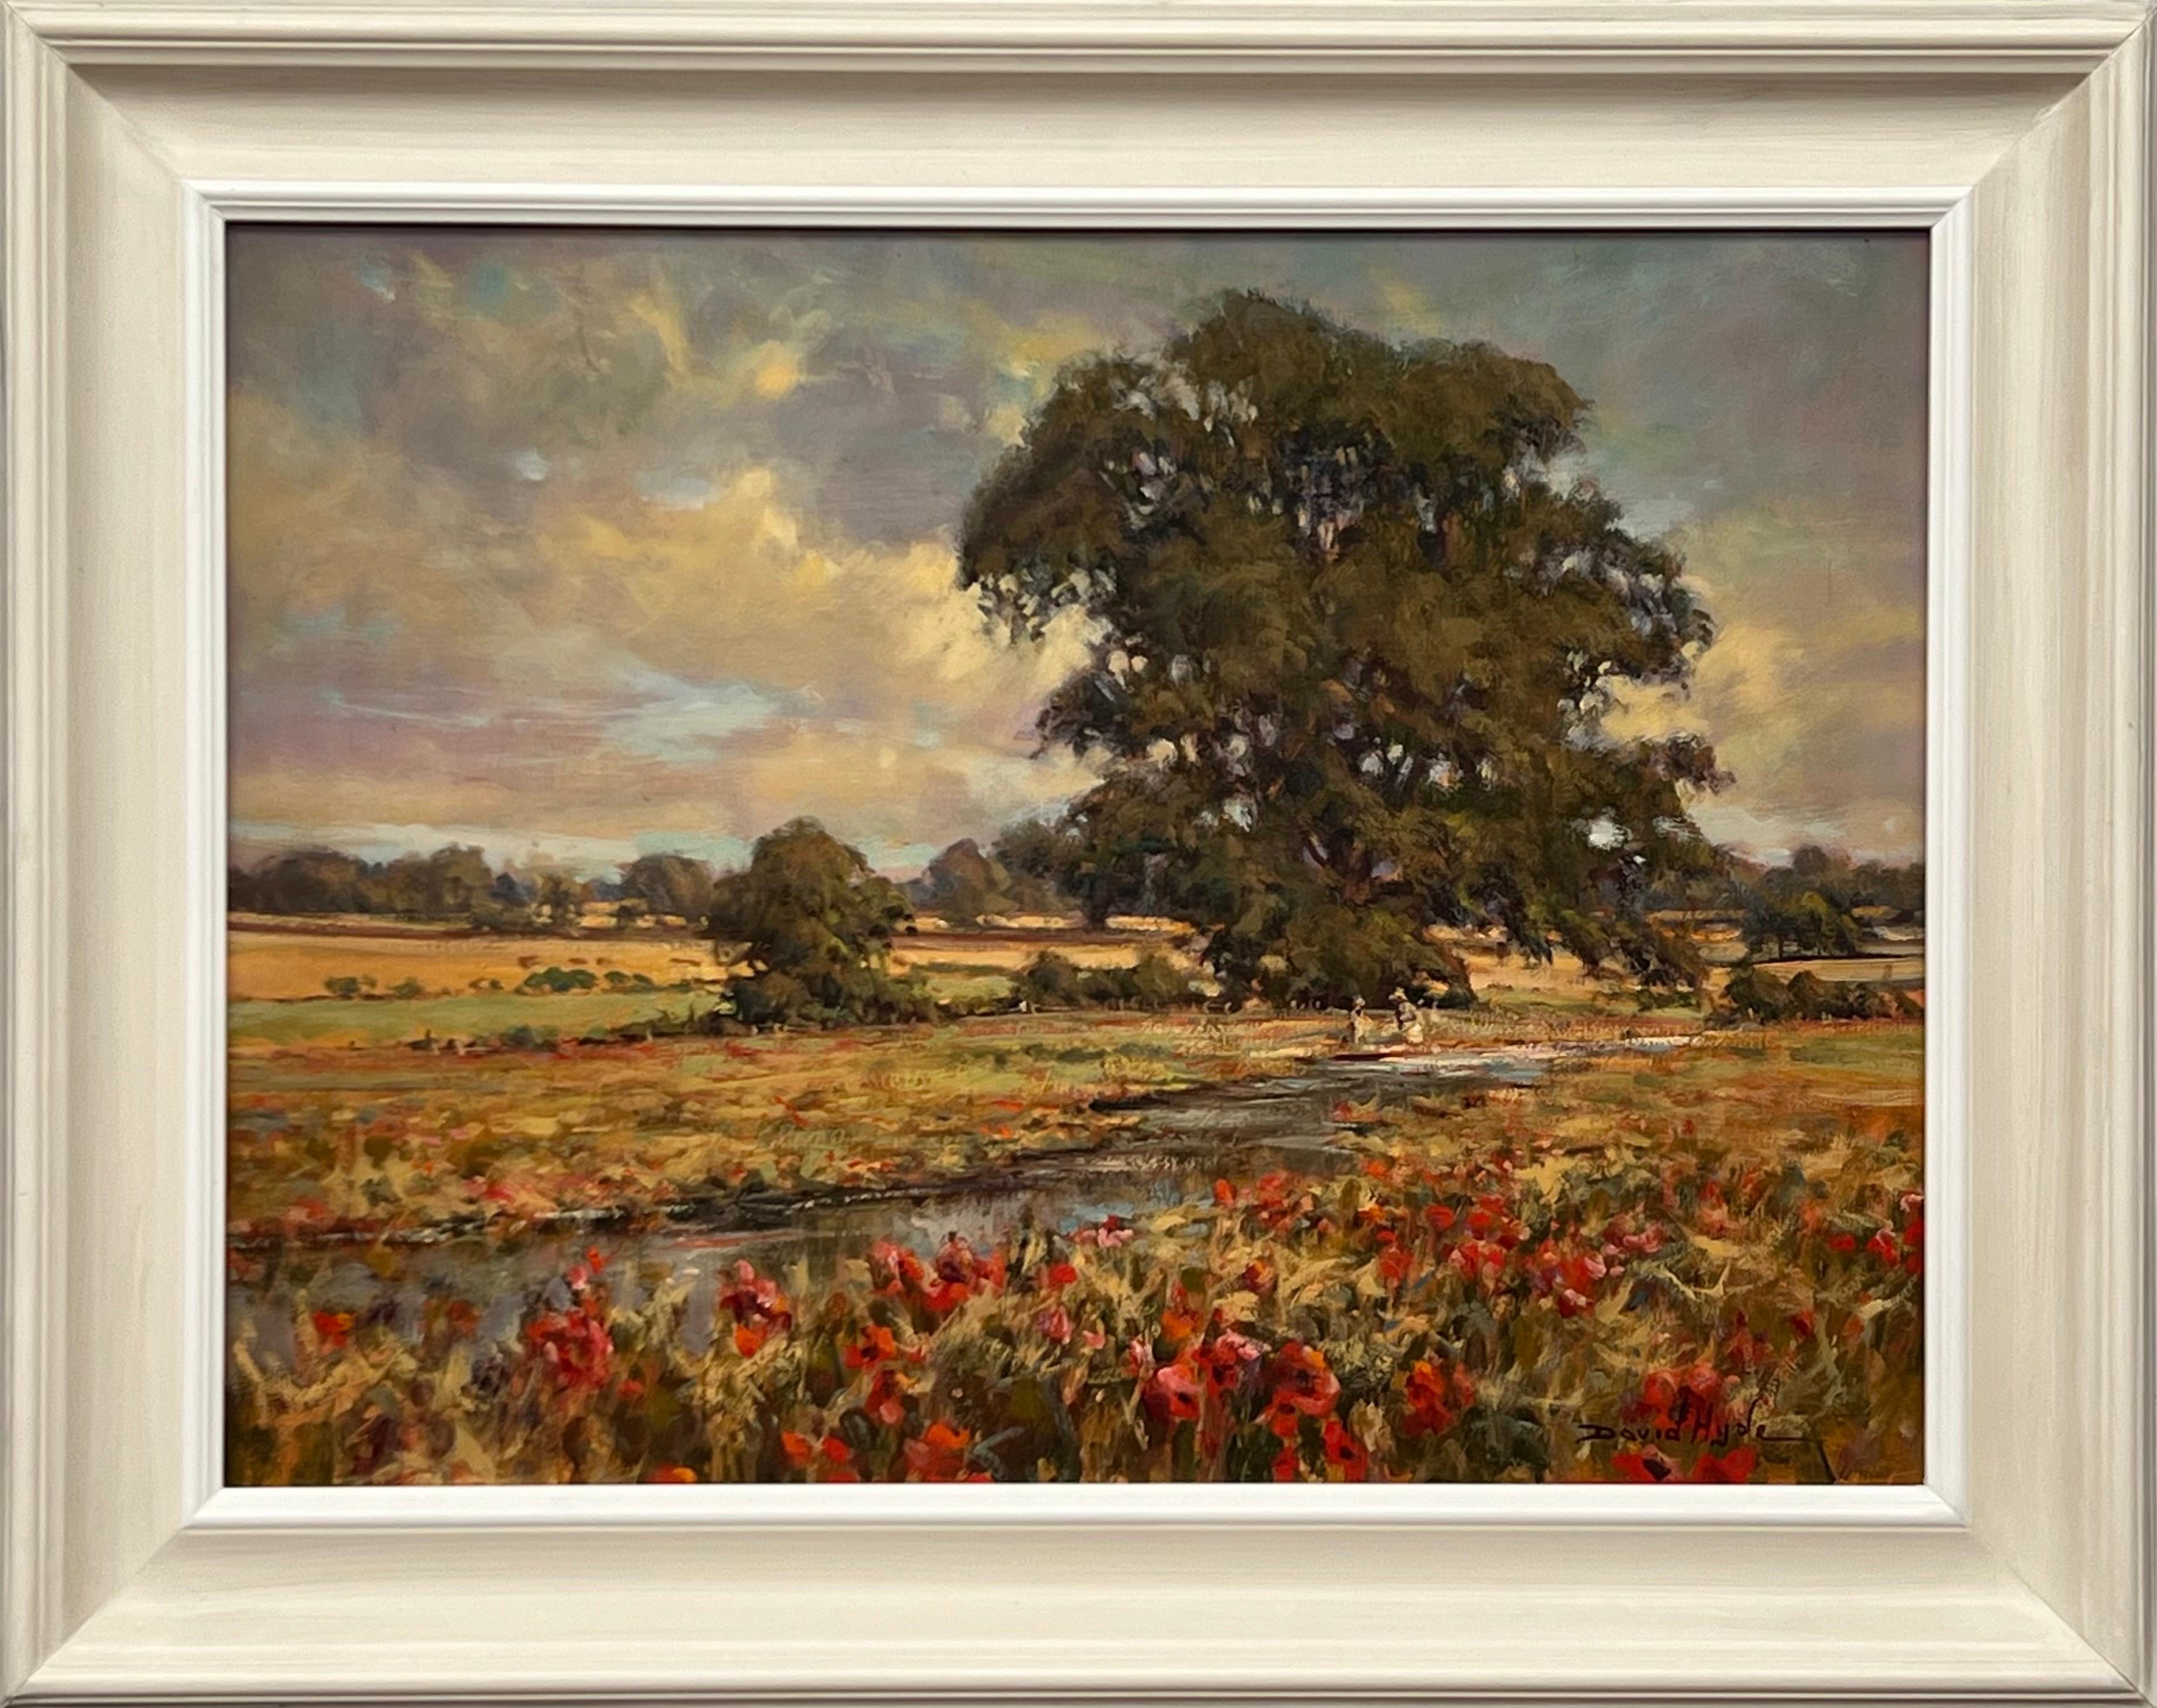 Vintage Impressionist English River Landscape Painting with Wild Red Flowers & Figures by British Artist, David Hyde. The painting depicts two children playing under a tree by a Riverside in the English Countryside, adjacent to a wild meadow. 

Art